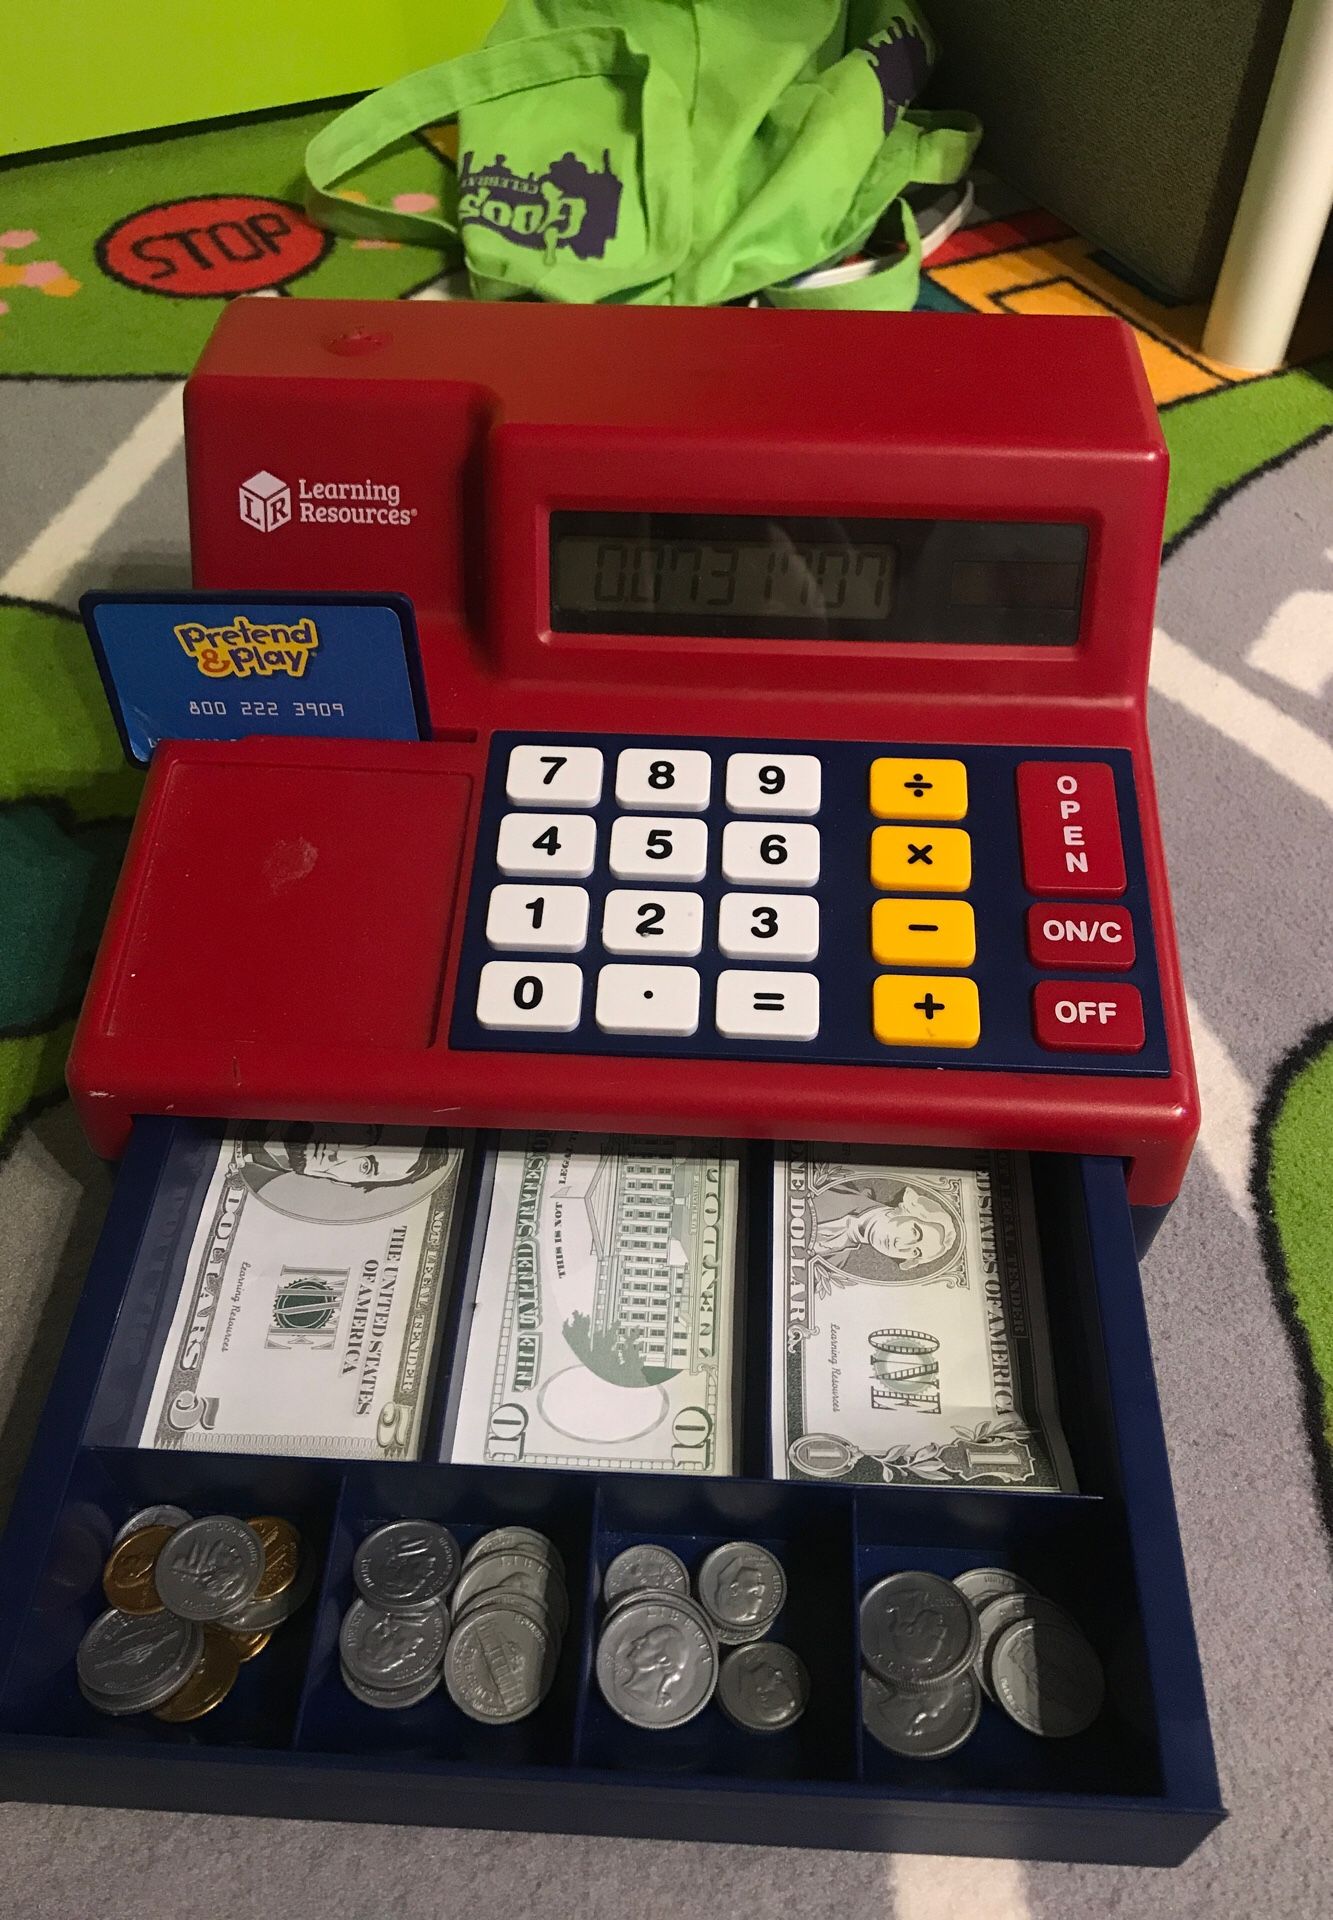 Pretend play cash register and calculator with fake coins and paper money. Perfect for teaching kids the concept of money.